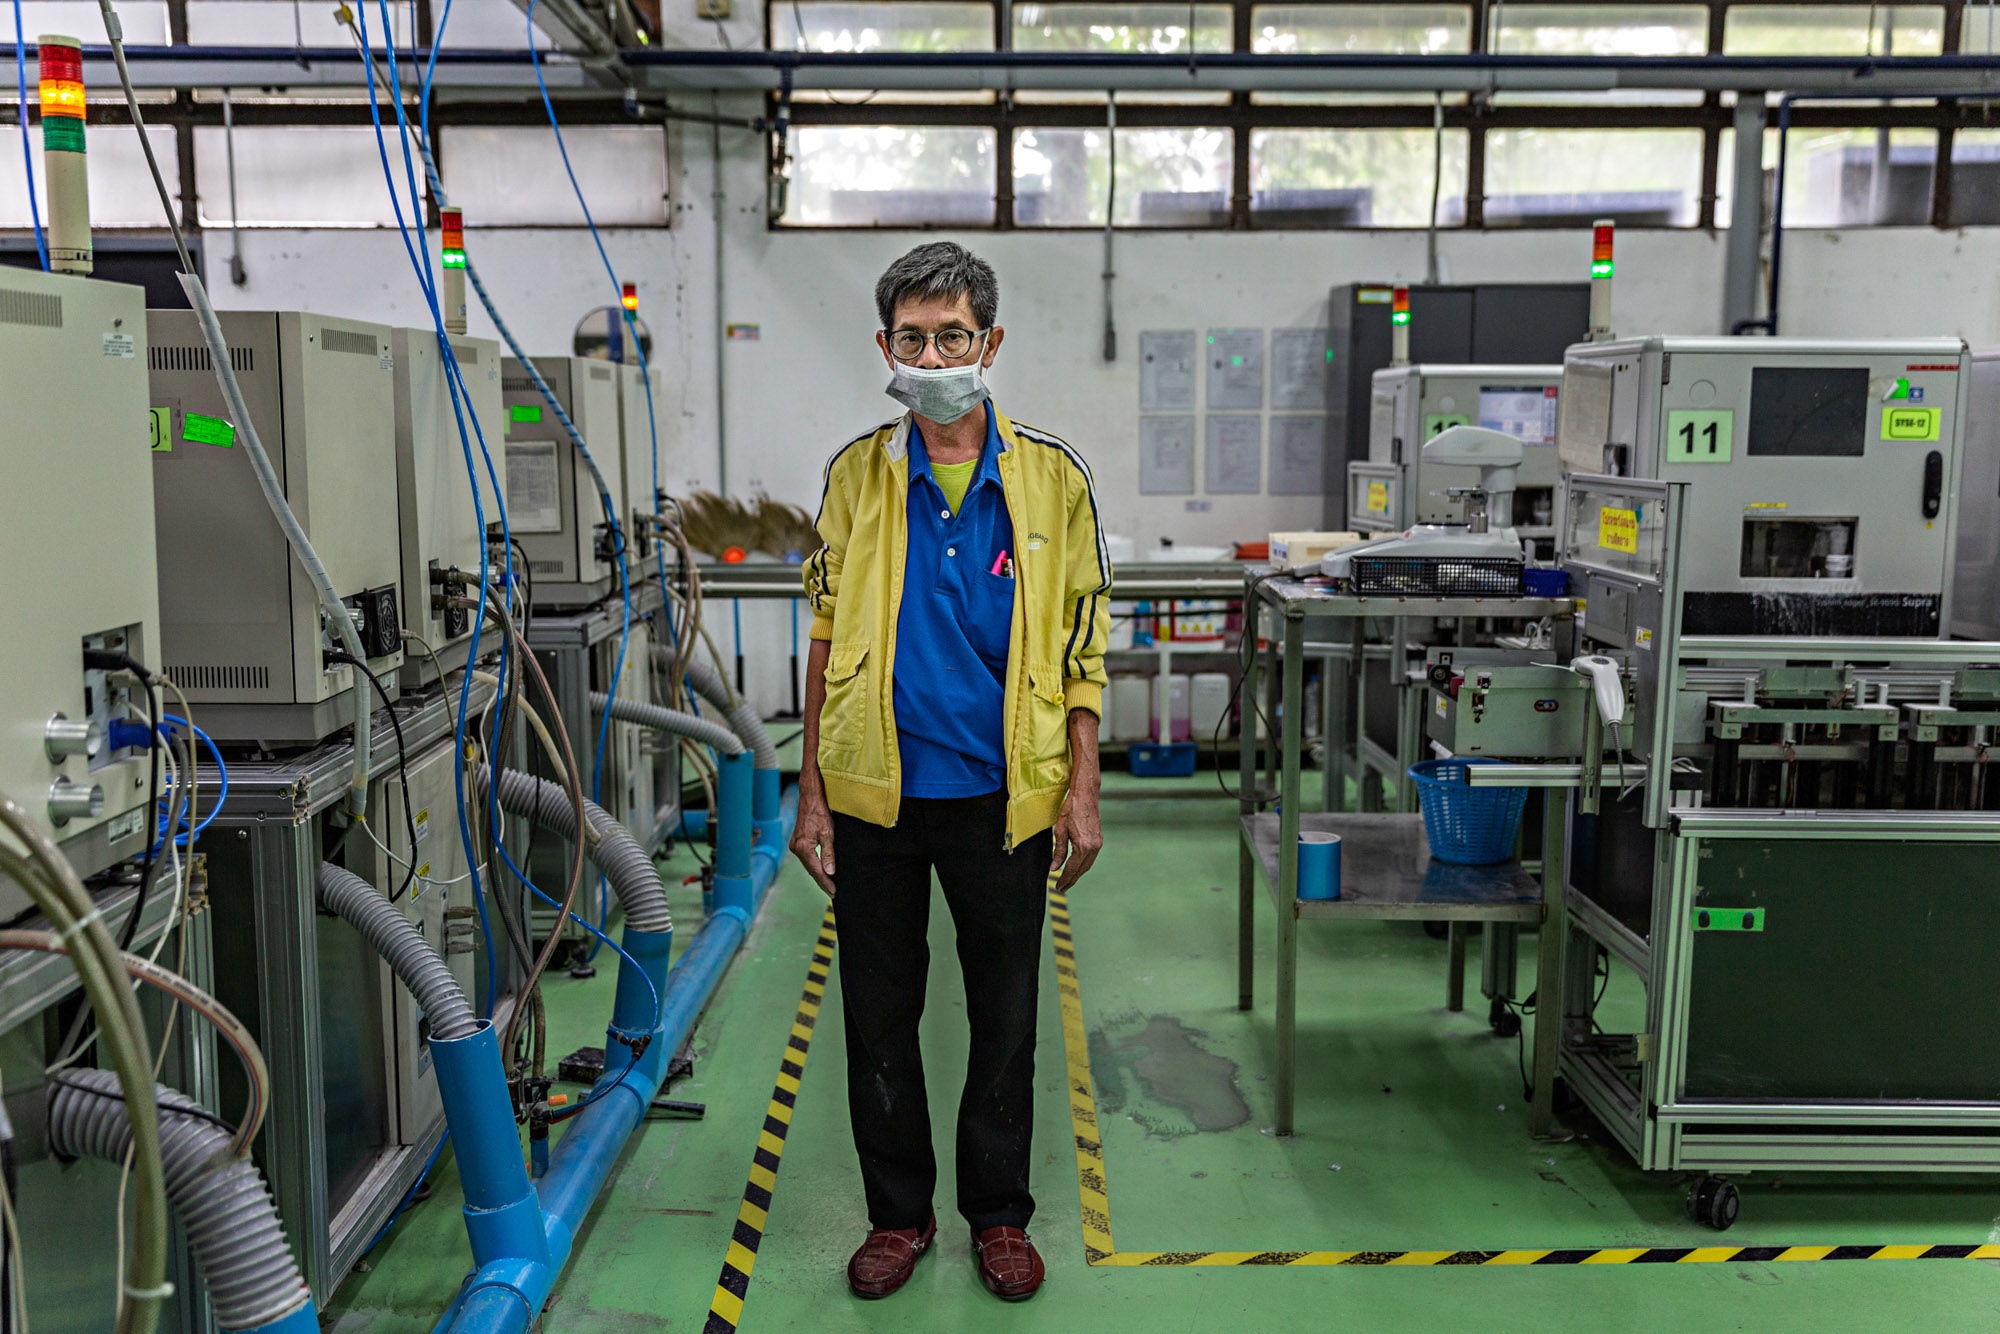 Thailand Glasses Factory: Stern - Mr. Theerayuth Meeneadtree, 53, poses for a portrait at...